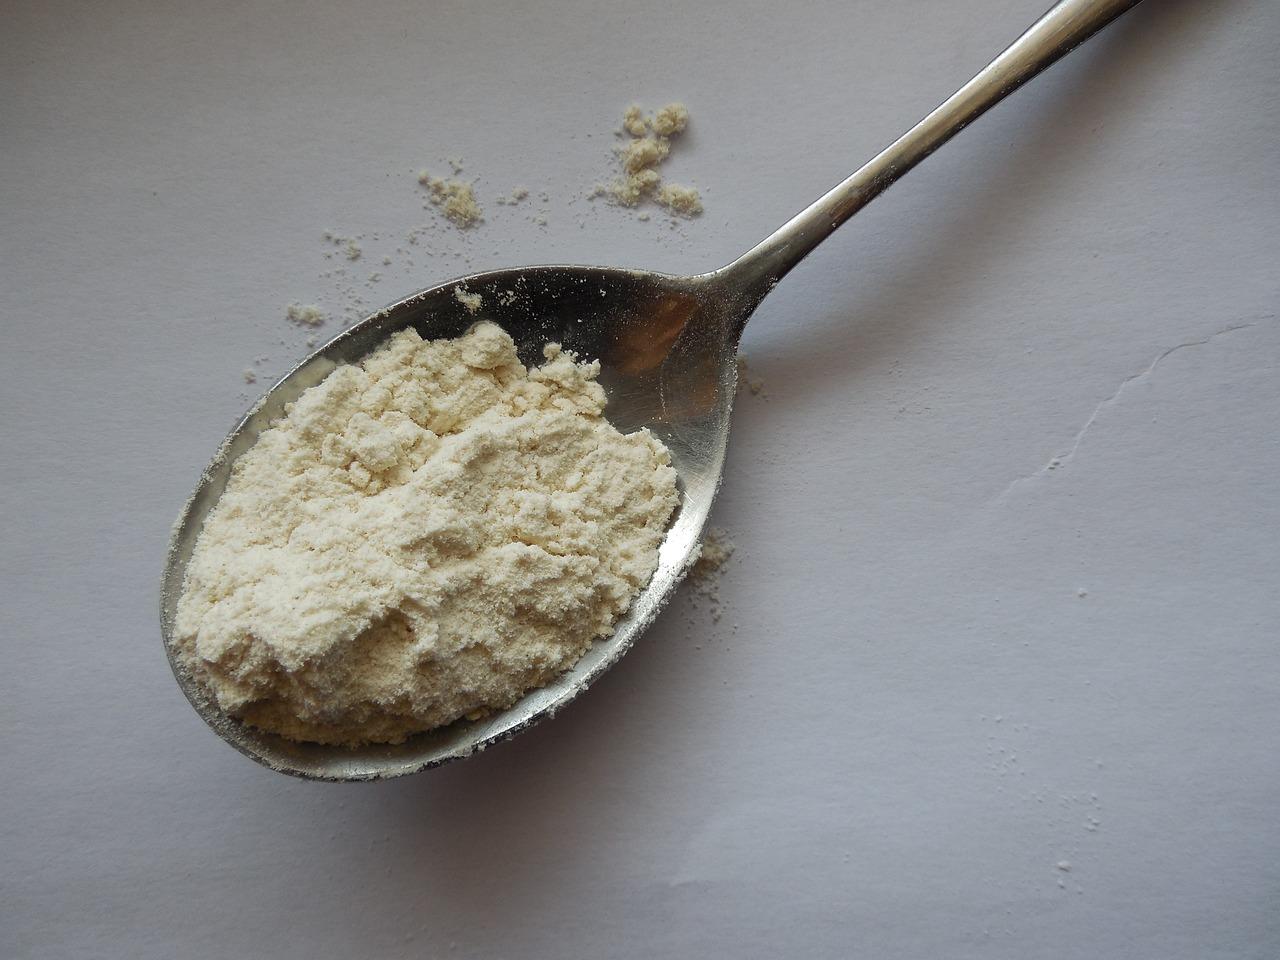 Can you eat a spoonful of flour? 